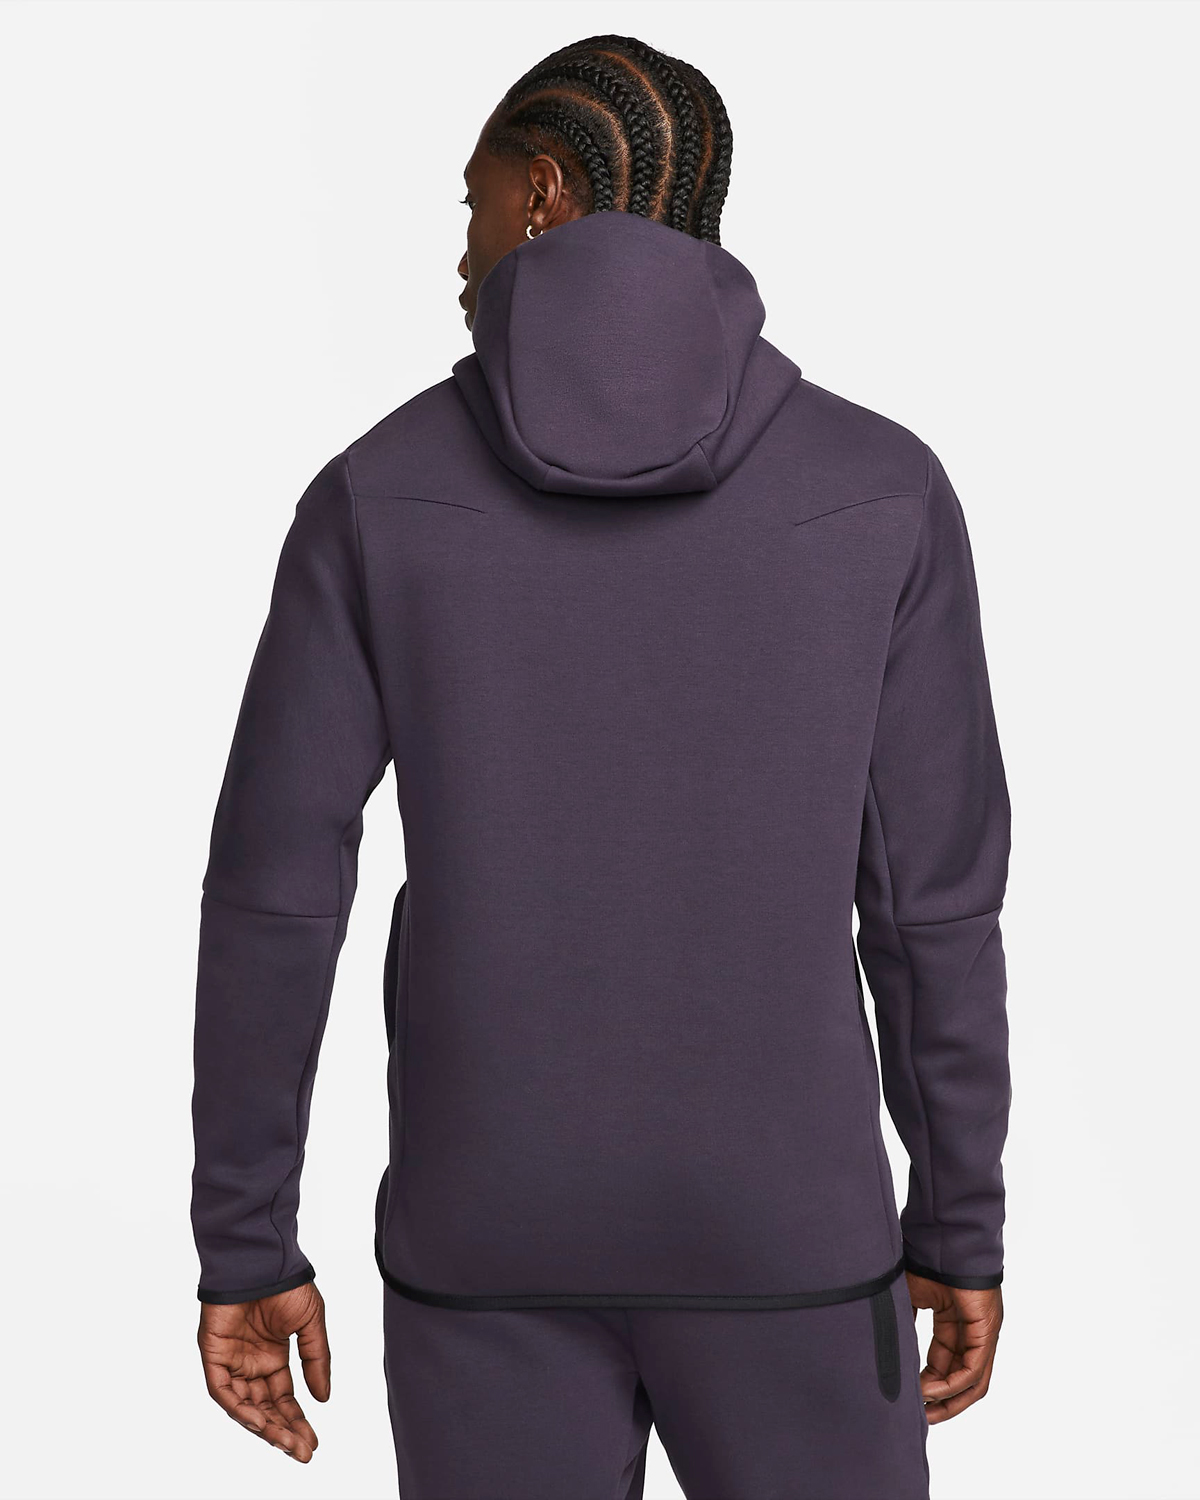 Nike Tech Fleece Hoodie and Pants Available in Cave Purple